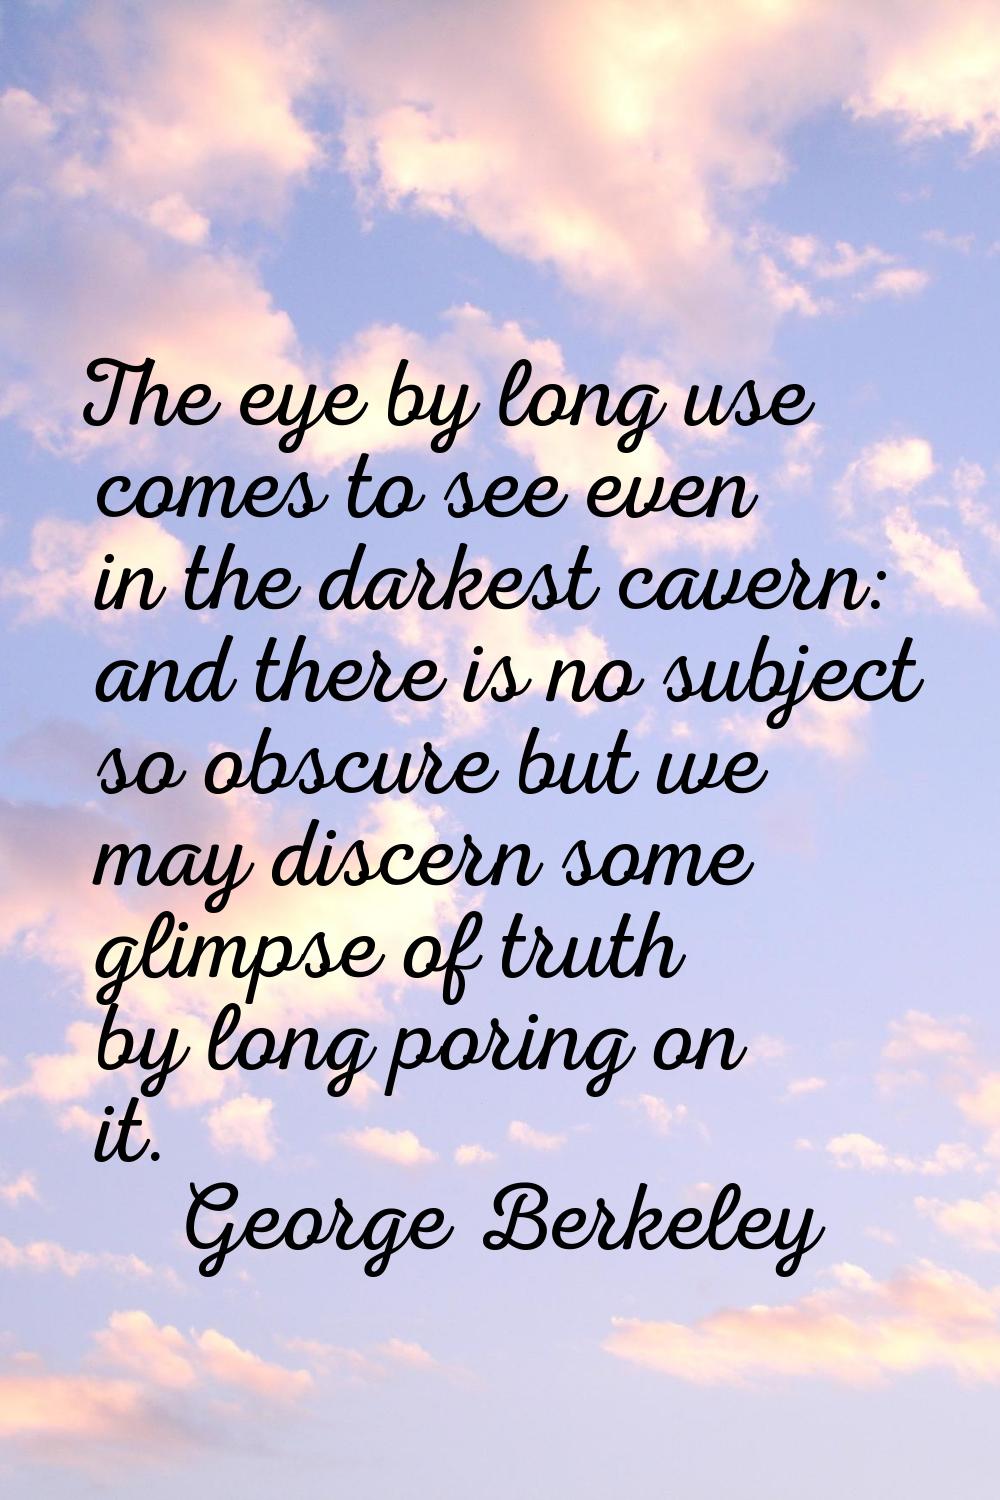 The eye by long use comes to see even in the darkest cavern: and there is no subject so obscure but